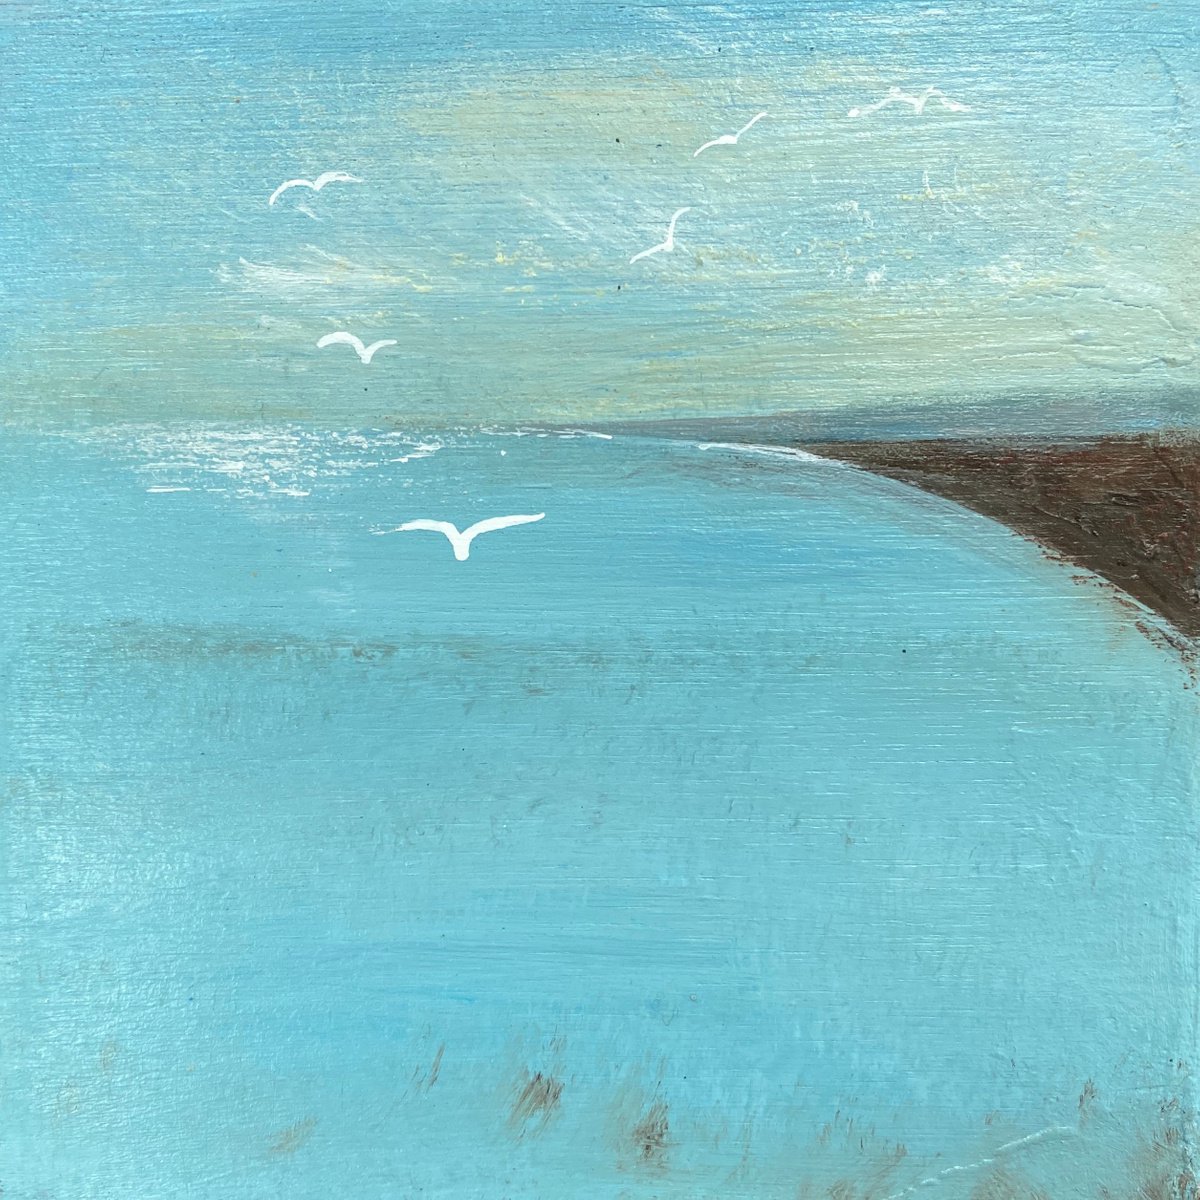 Seasons - Summer Nothing out at Sea but Gulls by Teresa Tanner